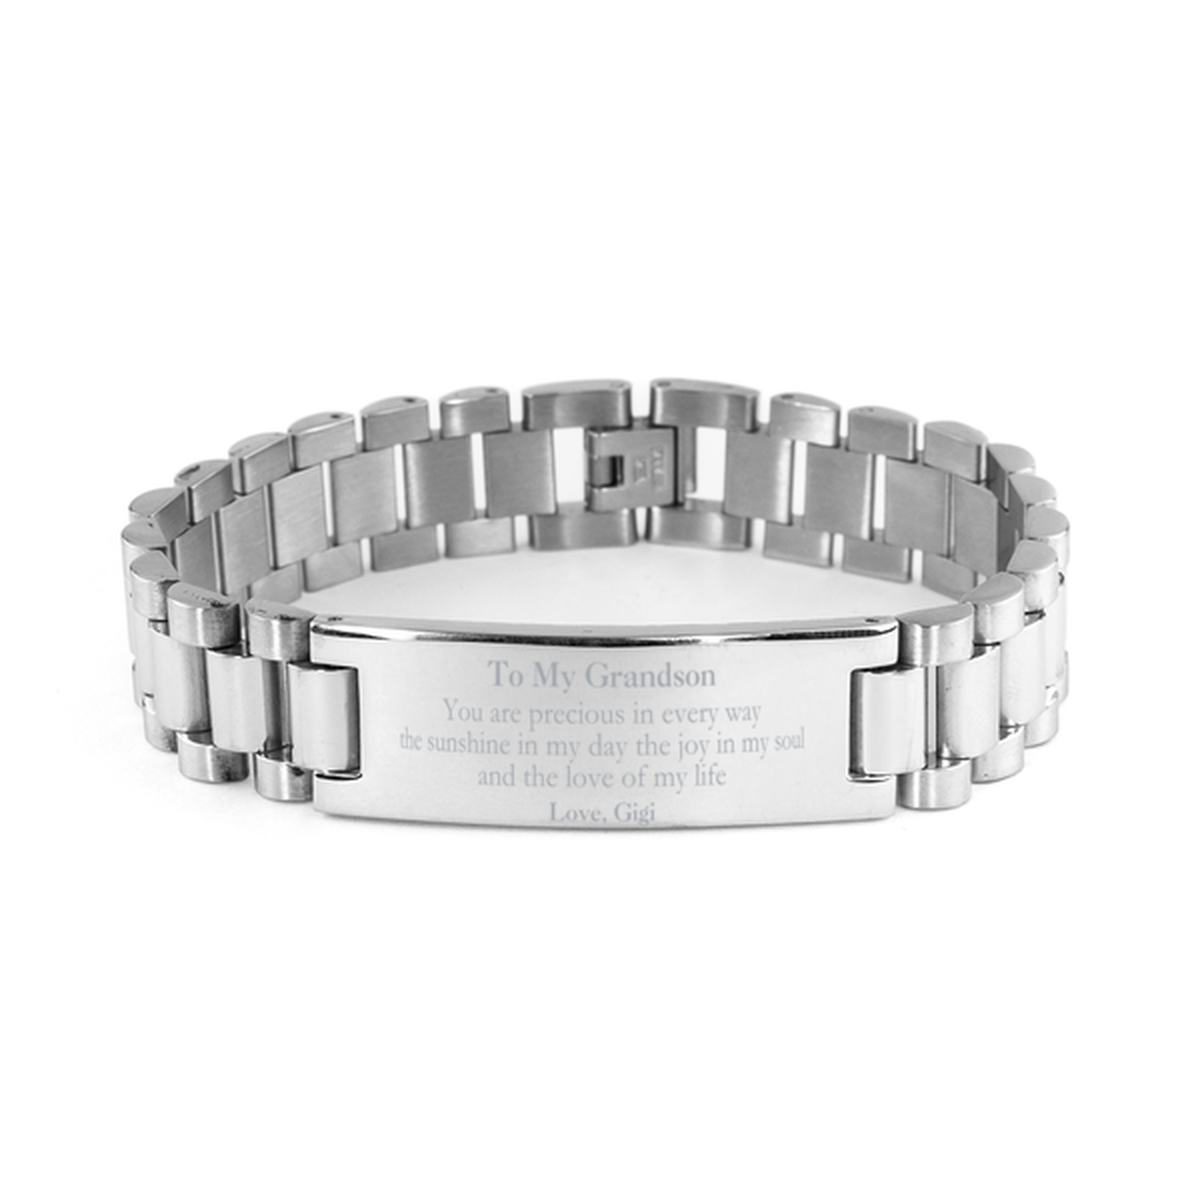 Graduation Gifts for Grandson Ladder Stainless Steel Bracelet Present from Gigi, Christmas Grandson Birthday Gifts Grandson You are precious in every way the sunshine in my day. Love, Gigi